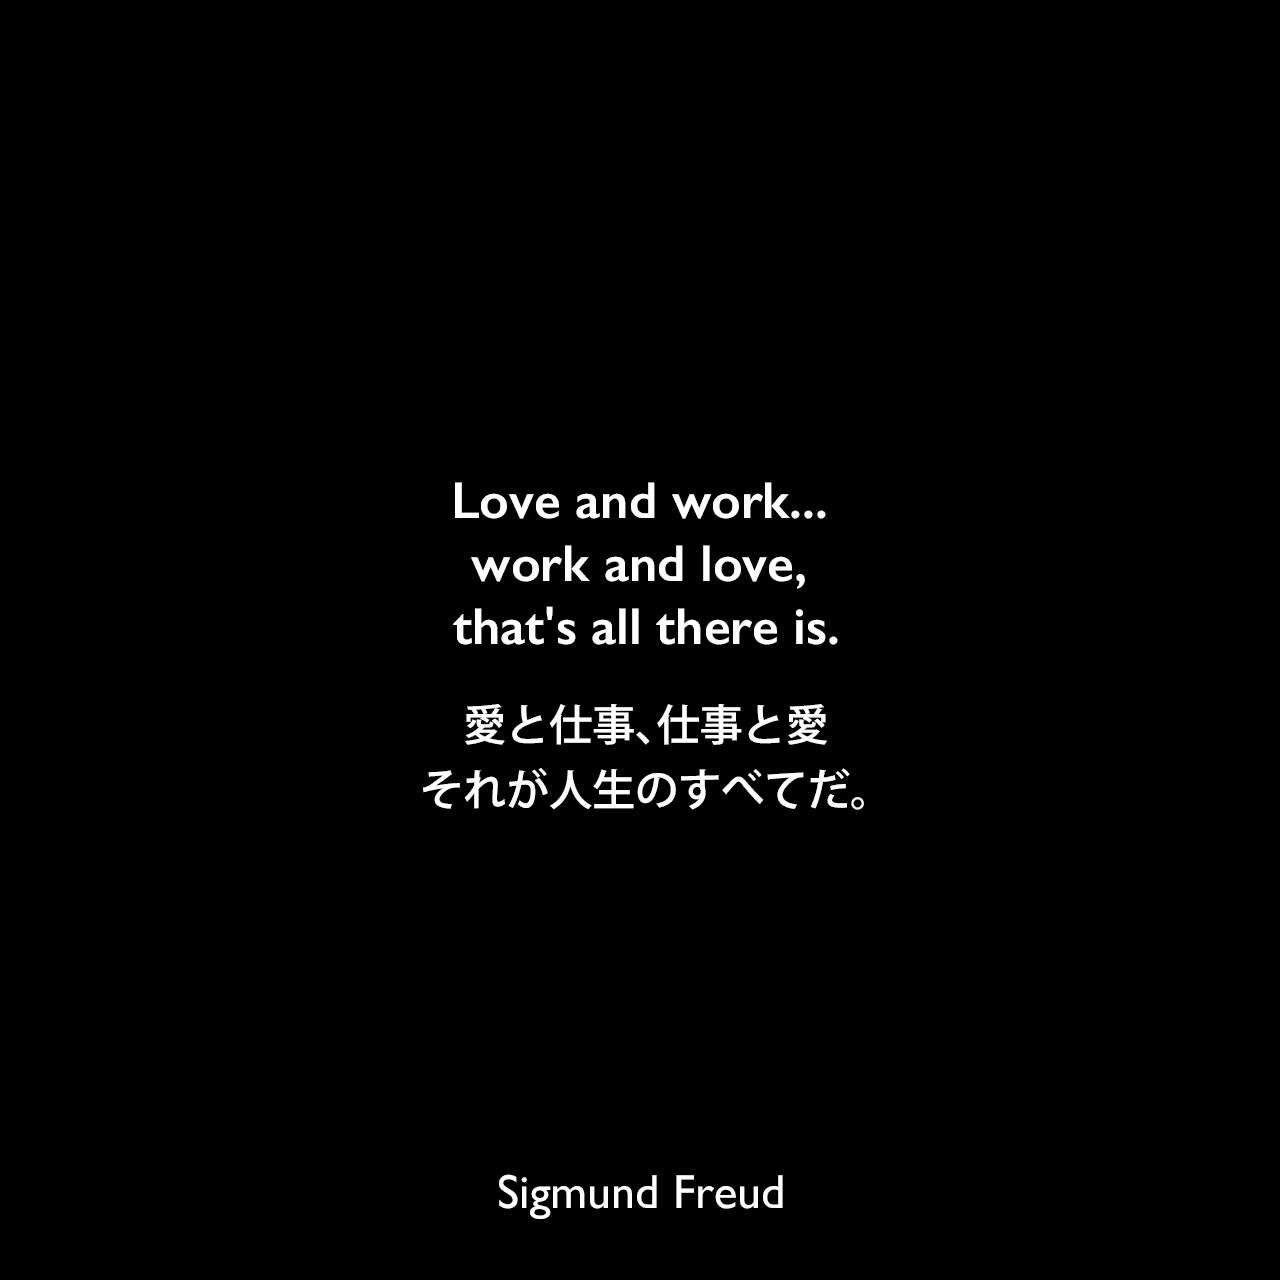 Love and work... work and love, that's all there is.愛と仕事、仕事と愛、それが人生のすべてだ。Sigmund Freud